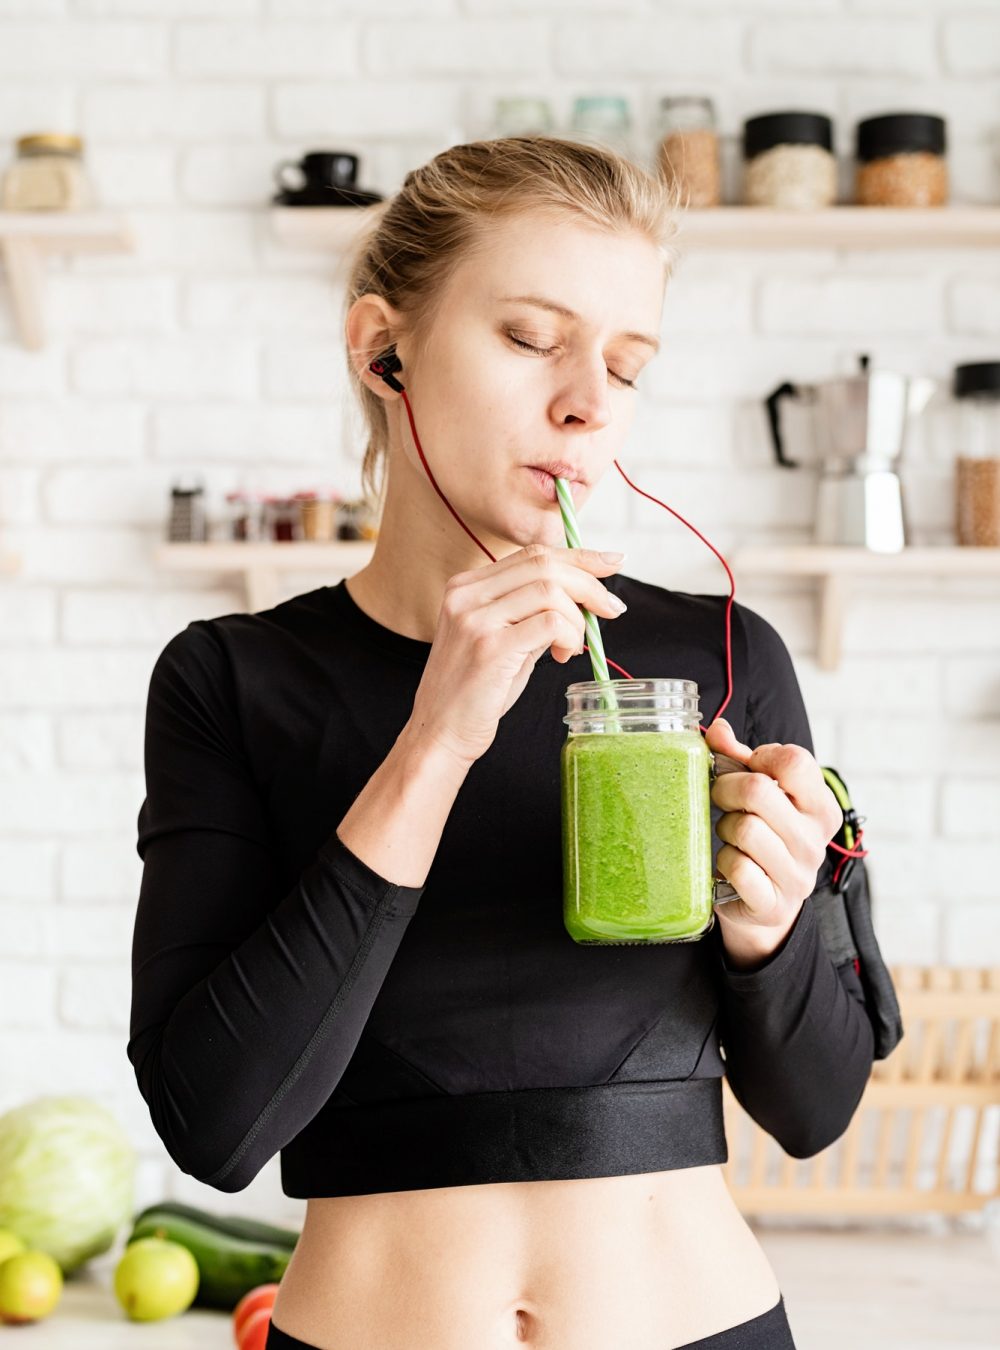 healthy-eating-dieting-concept-young-blond-woman-drinking-green-smoothie-from-mason-jar-at-home-ki.jpg